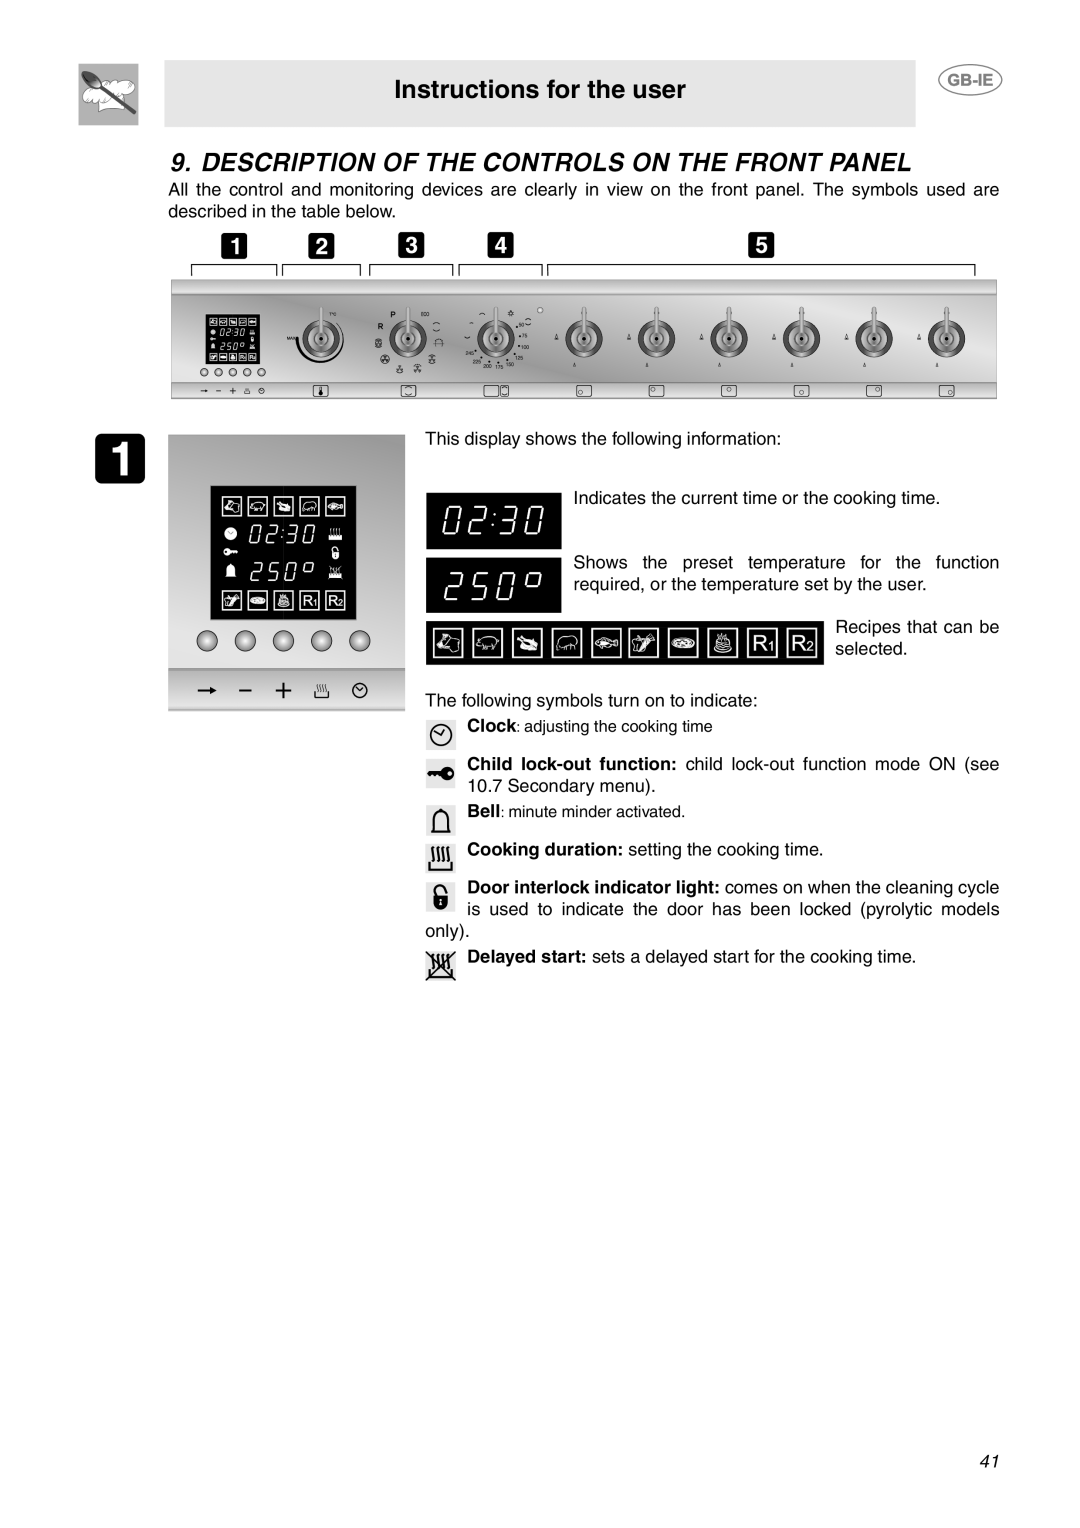 Smeg CE92GPX manual Description Of The Controls On The Front Panel, Instructions for the user 